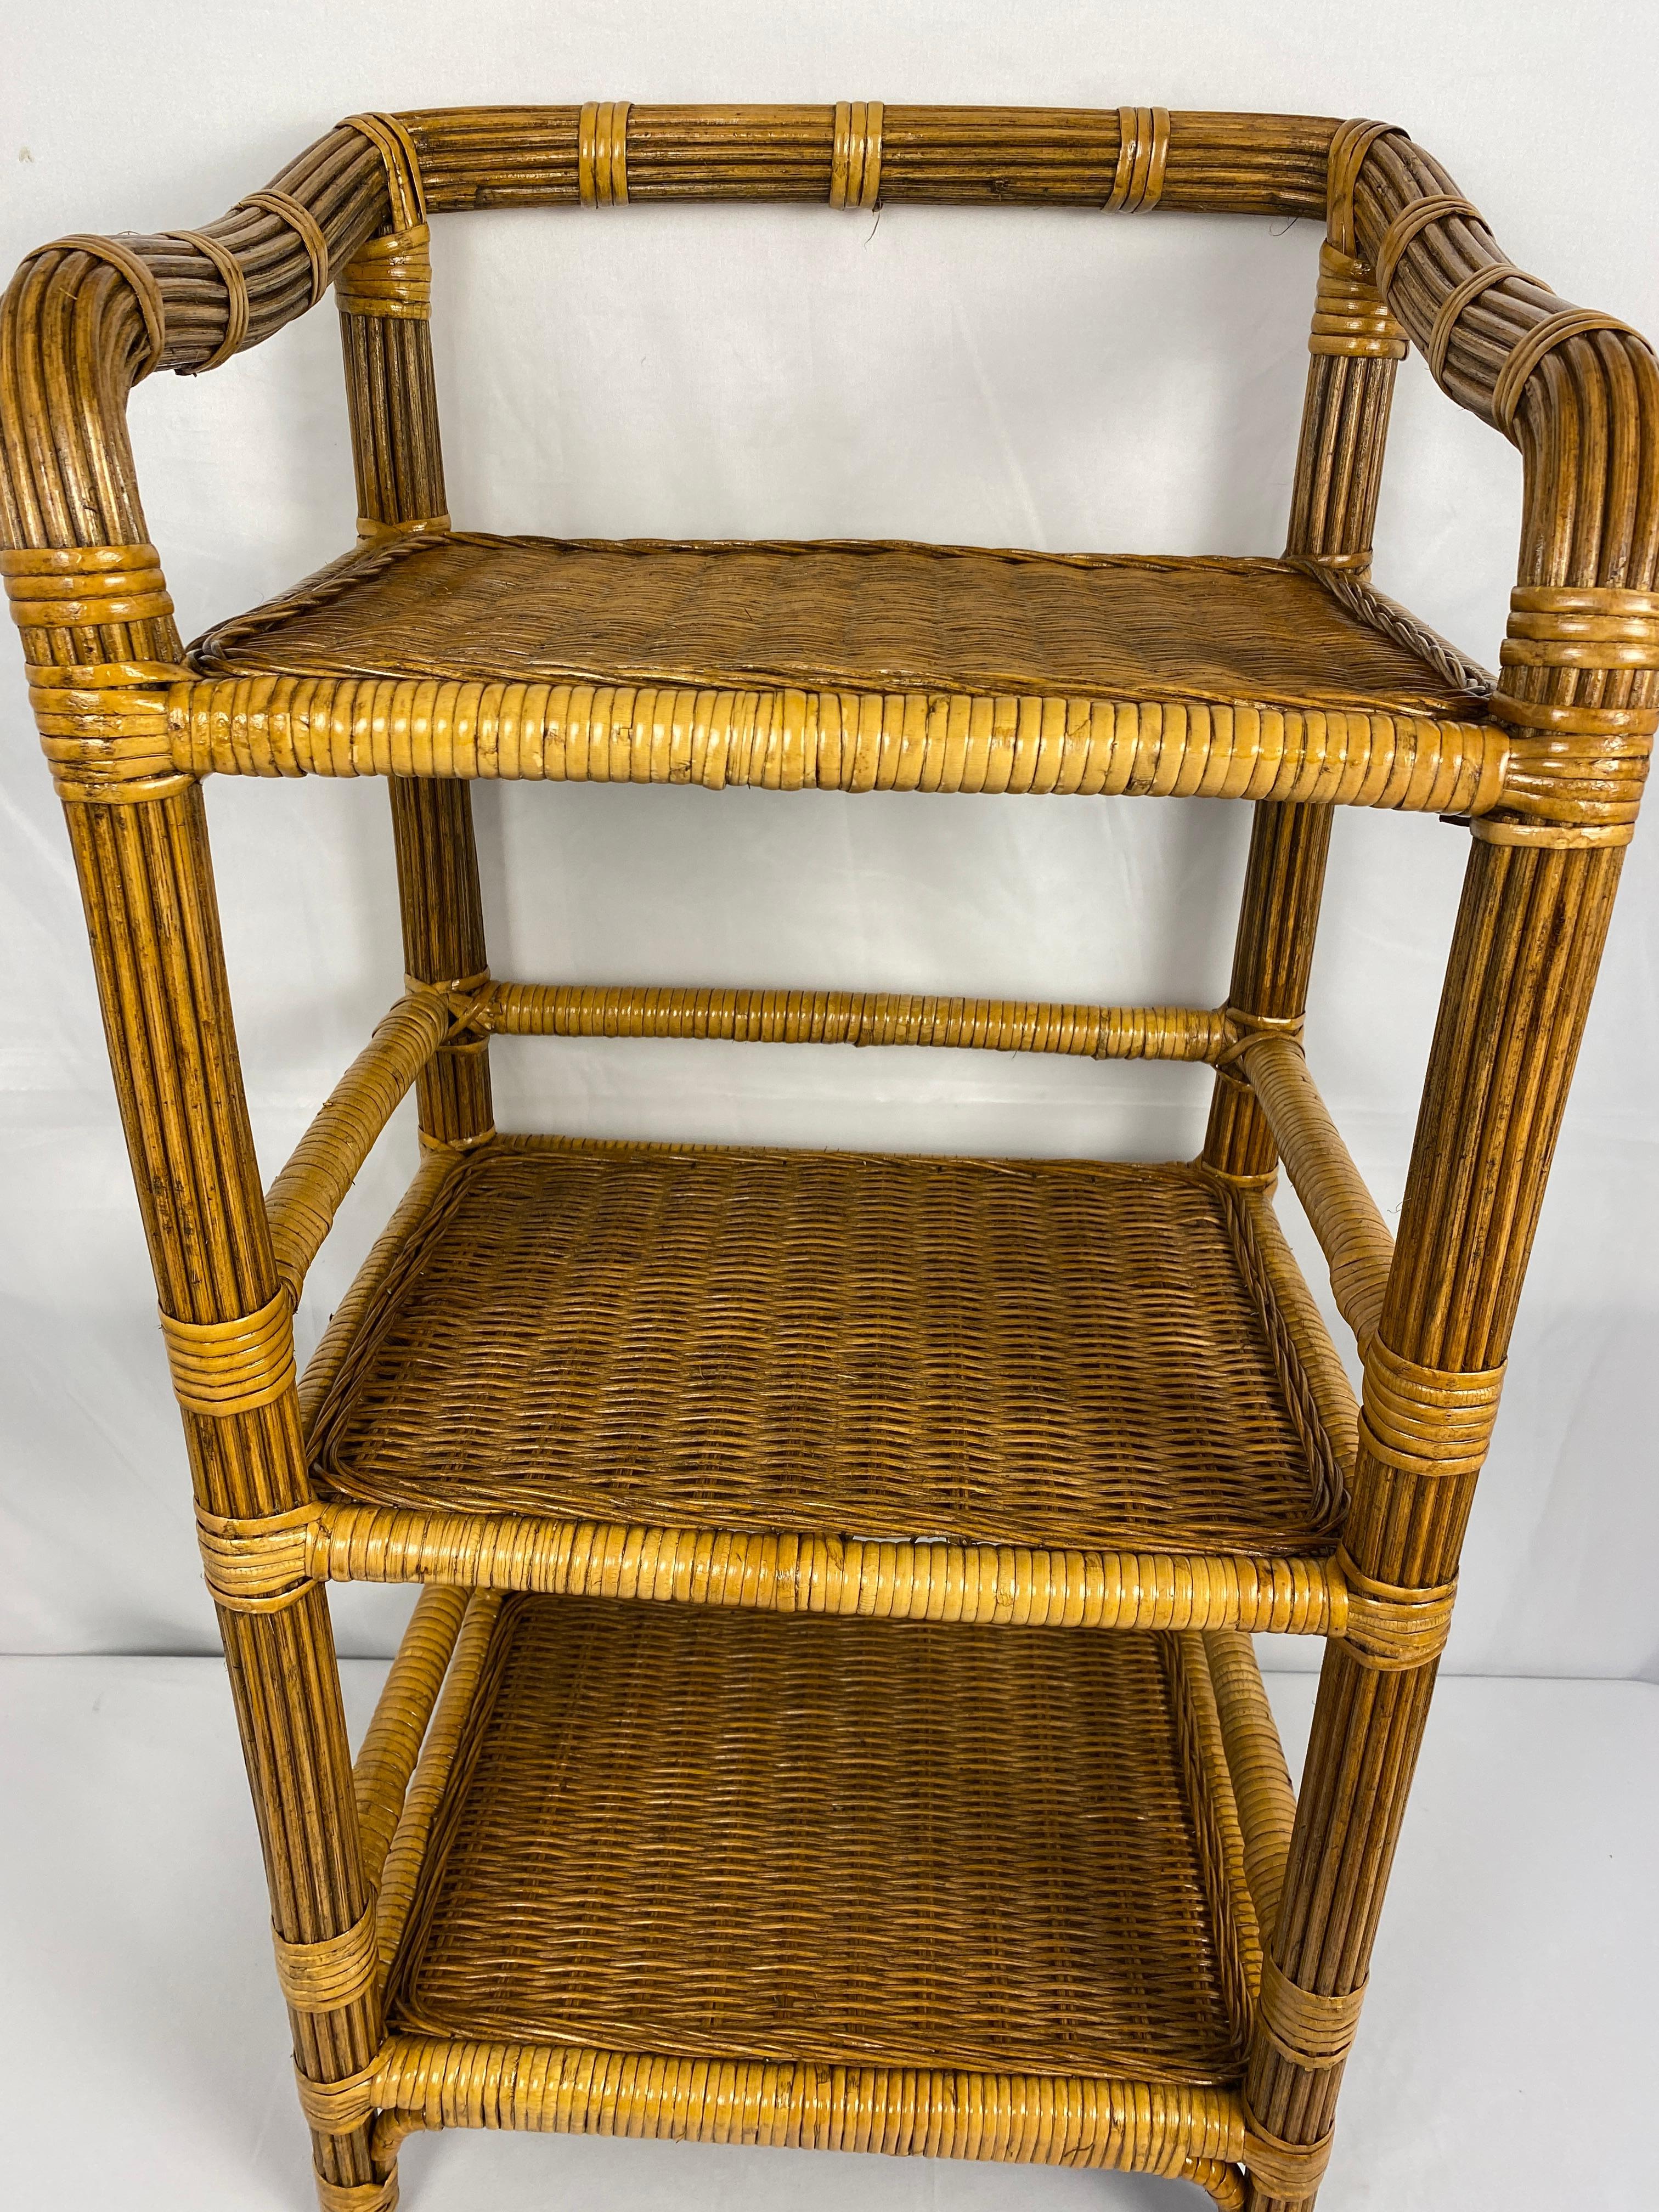 Vintage Rattan Side Table with 3 Shelves In Good Condition For Sale In Miami, FL